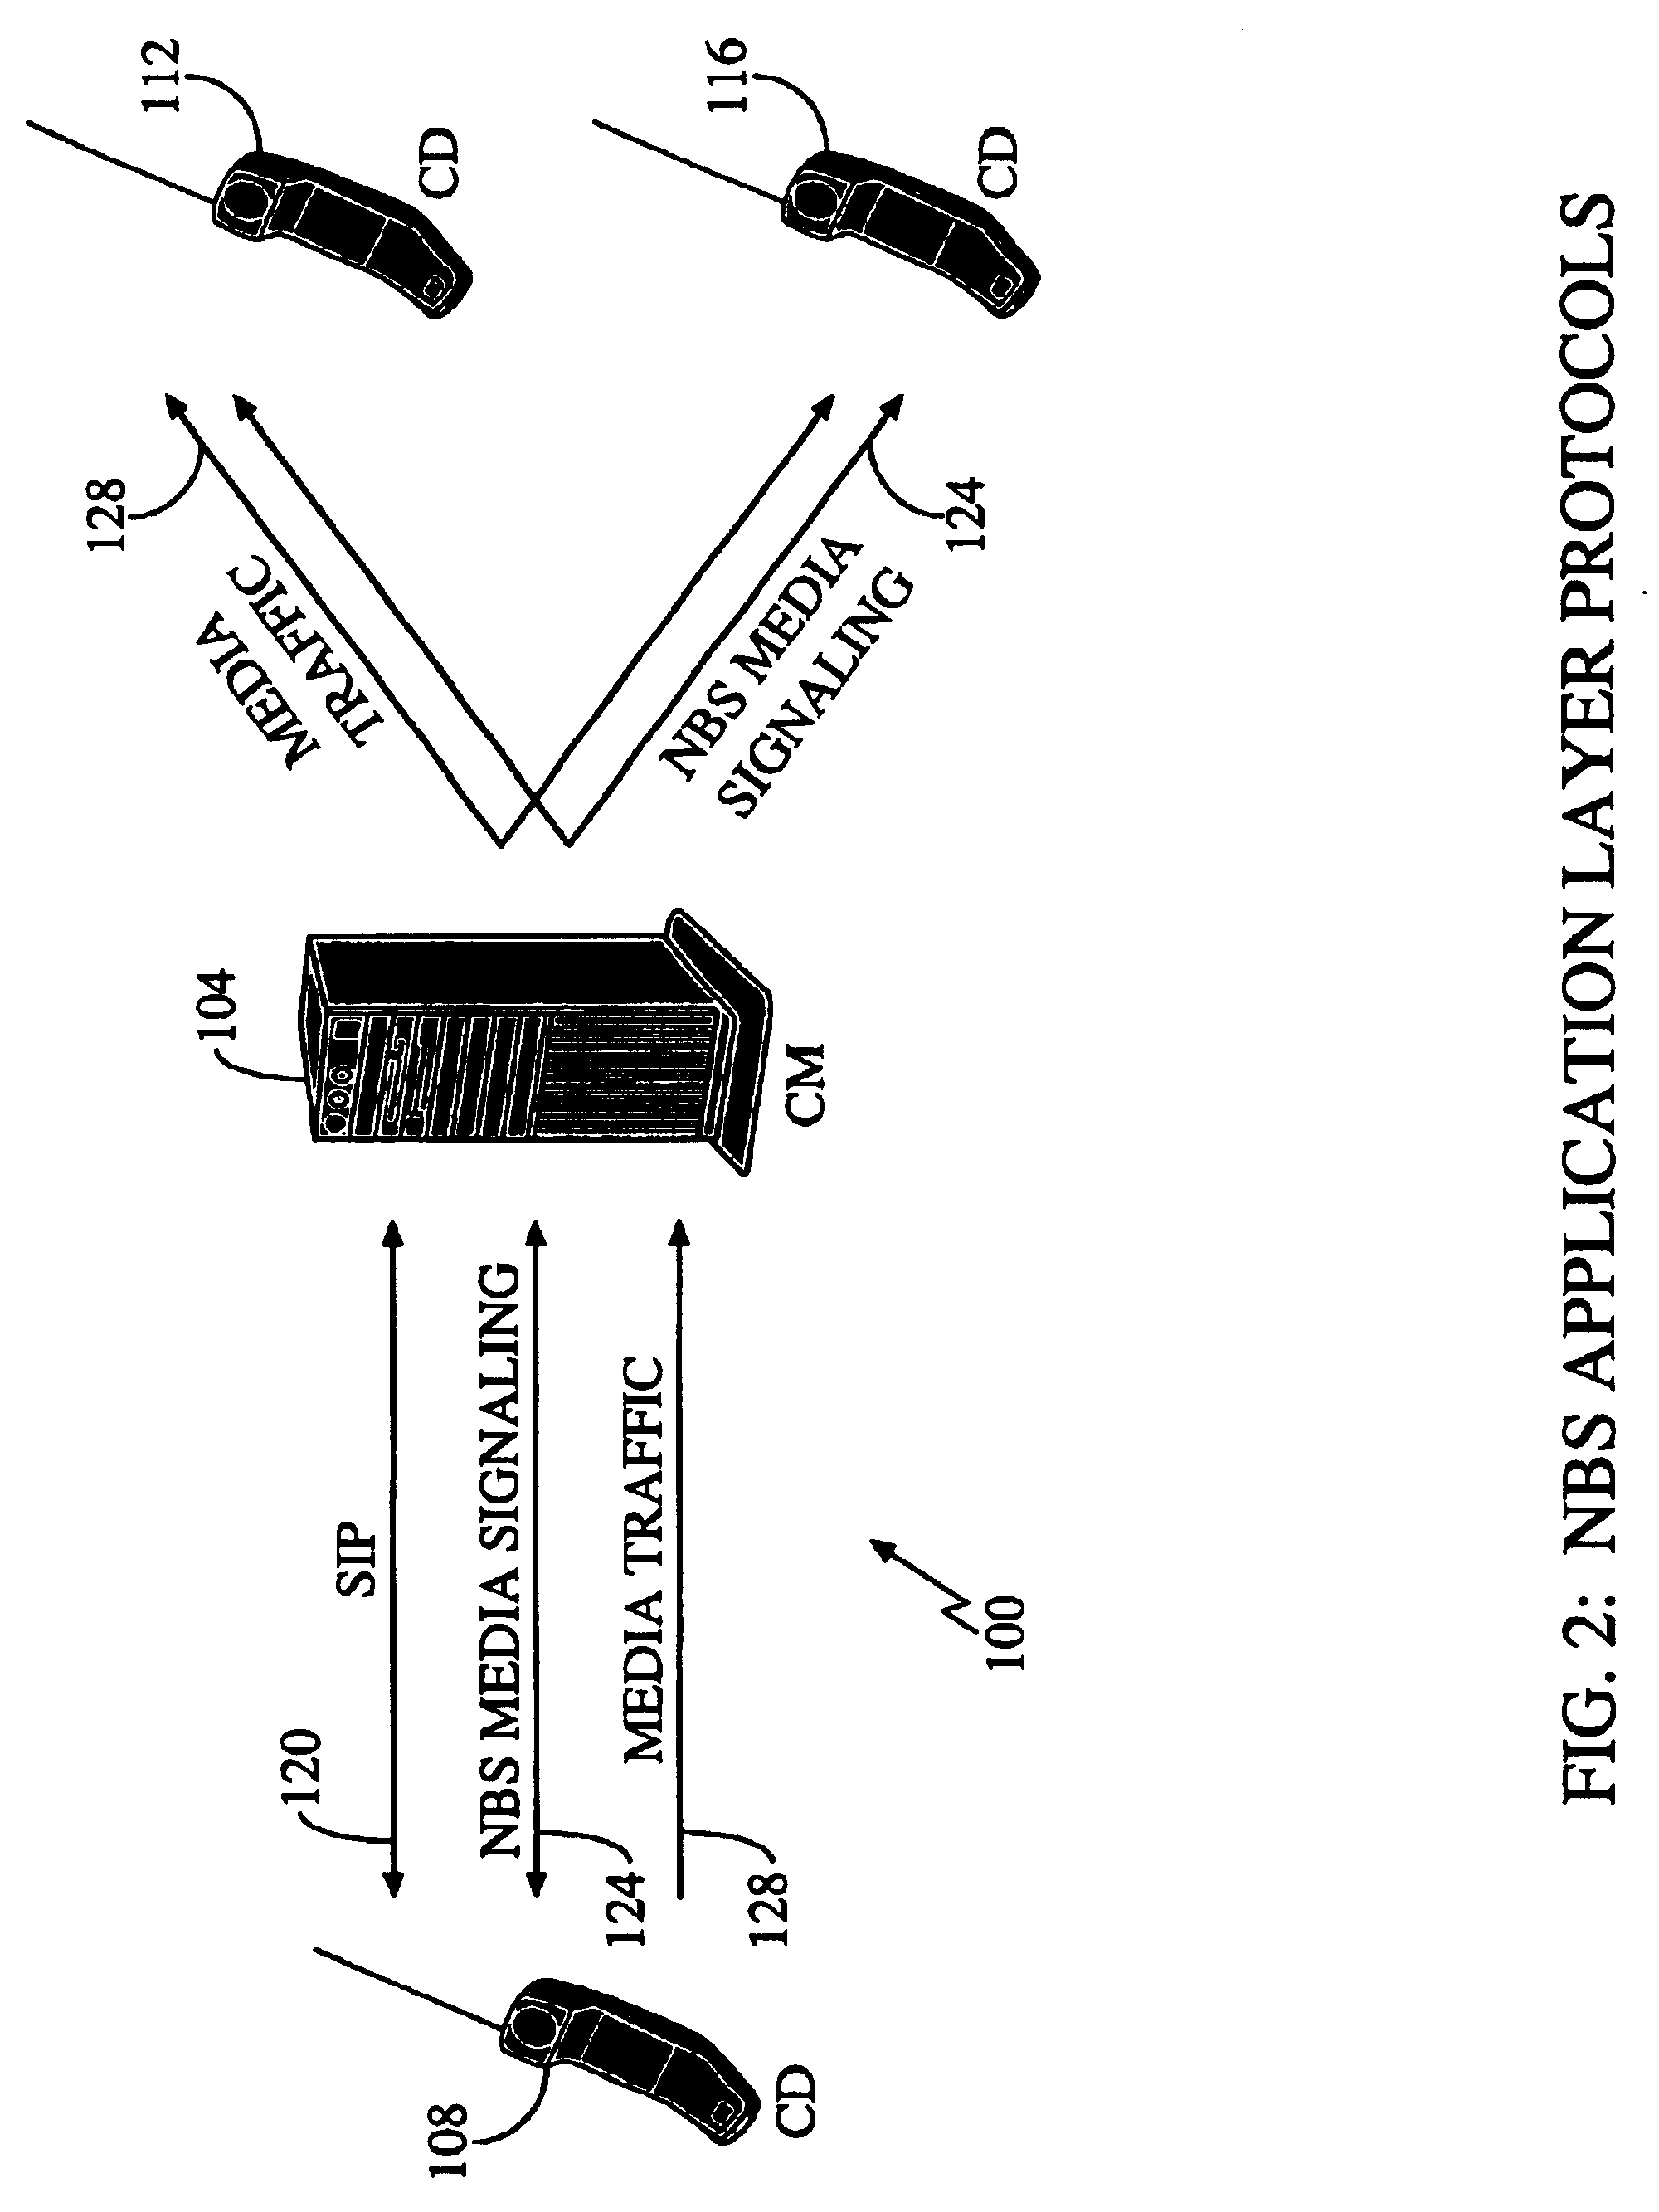 Method and apparatus for enabling group communication services in an existing communication system